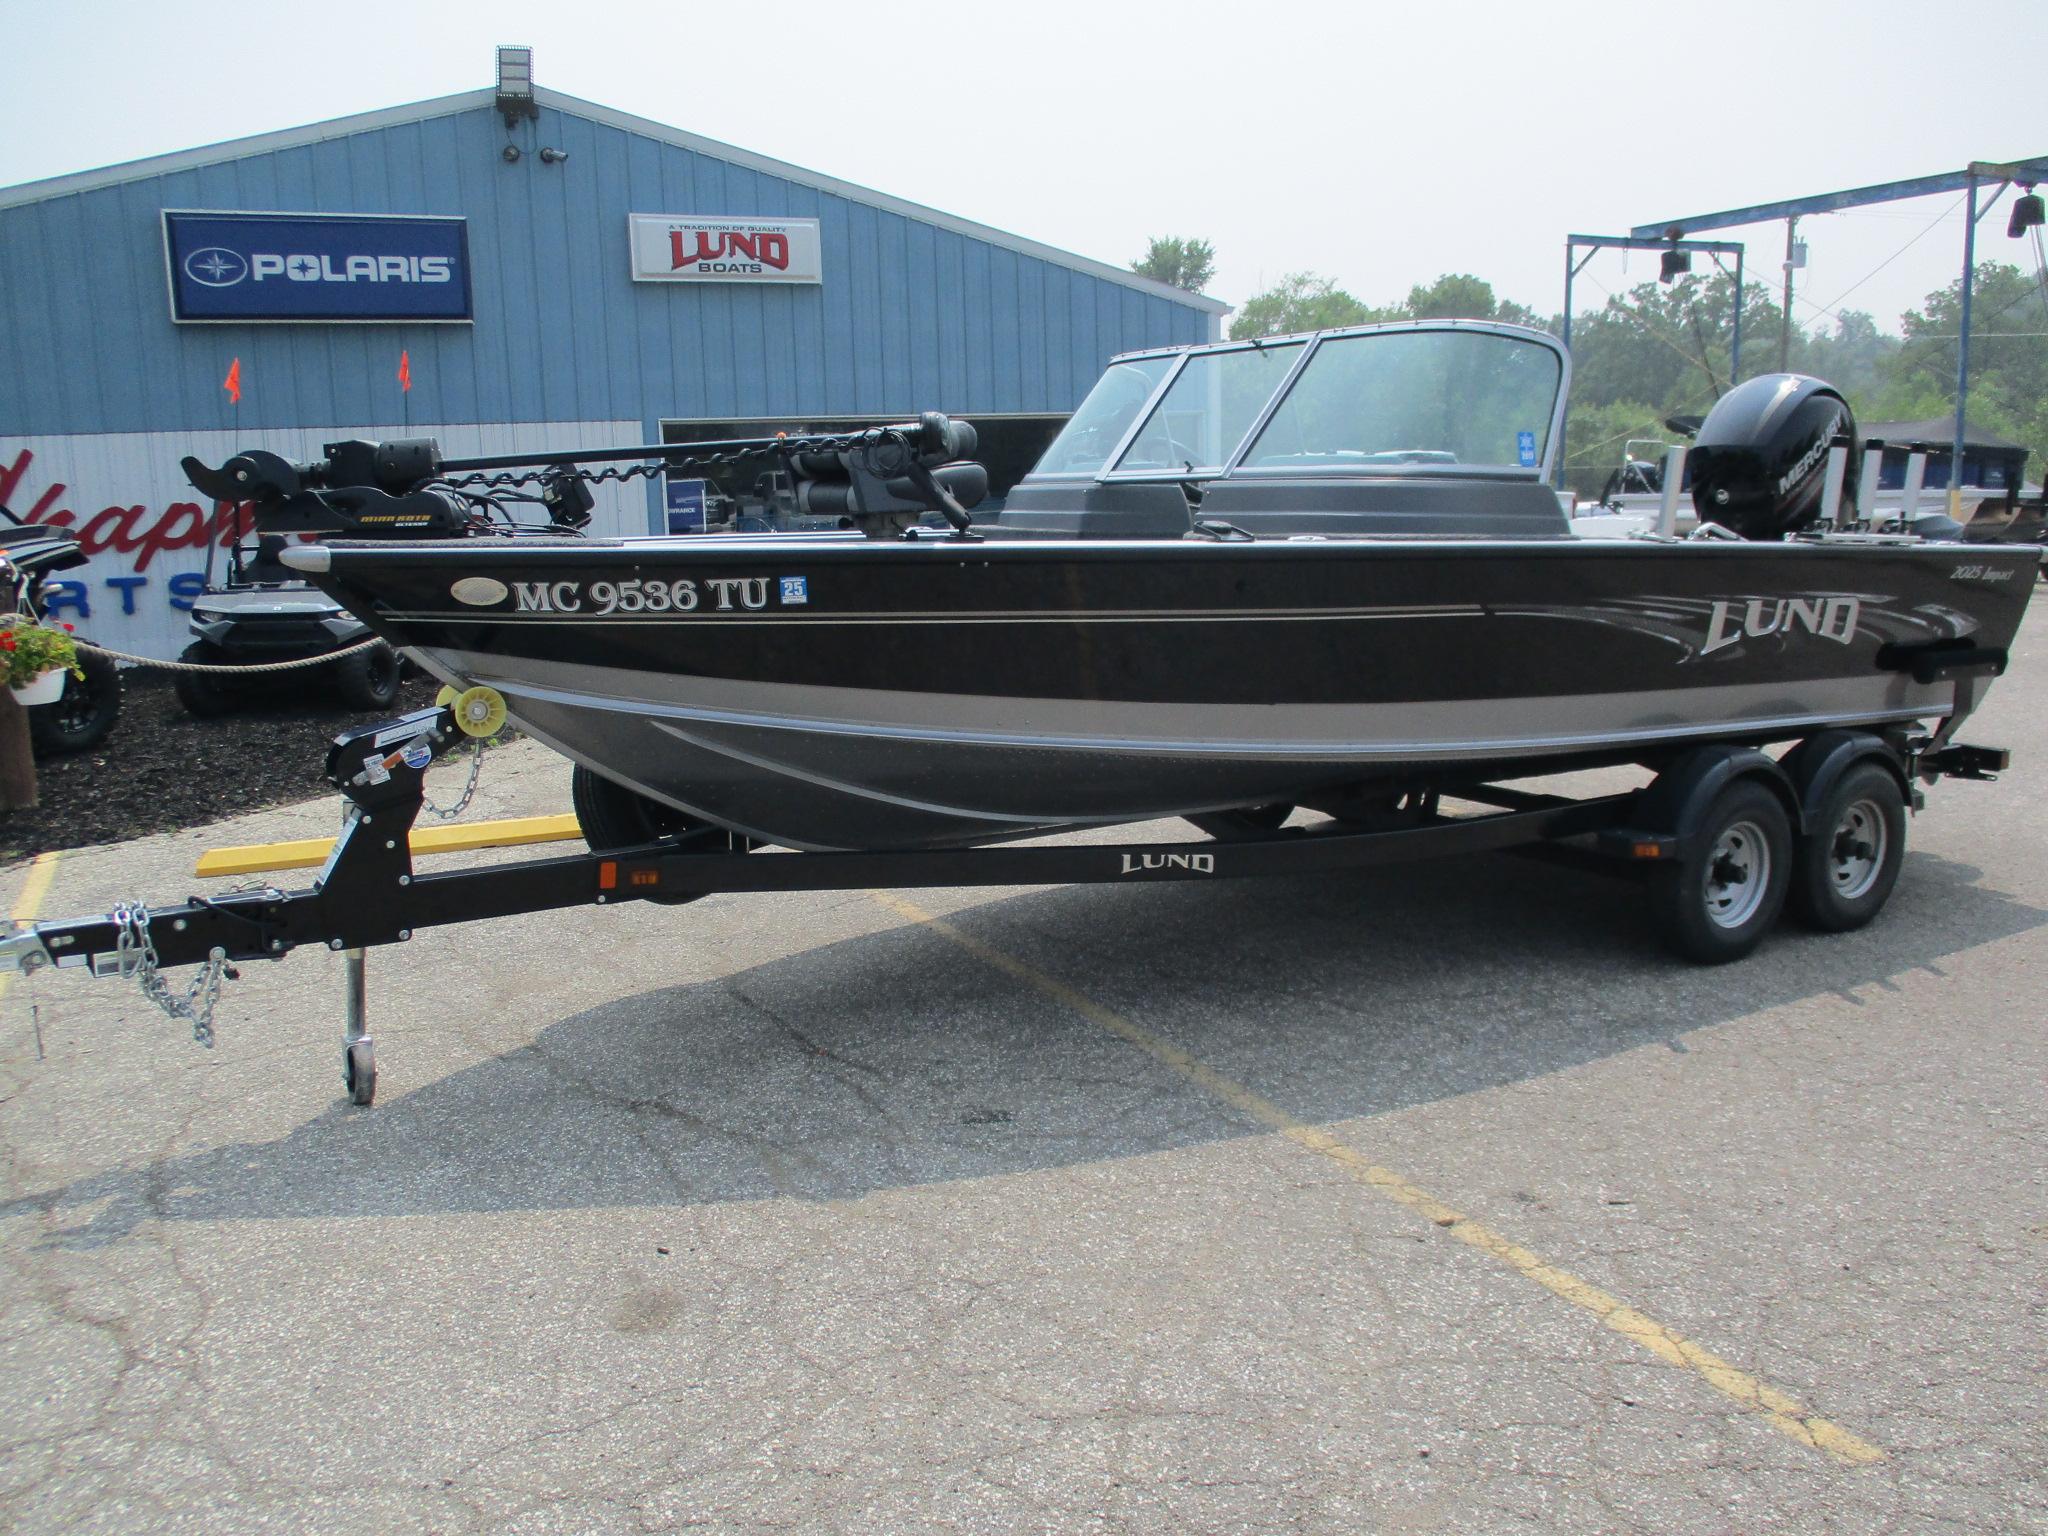 Page 17 of 58 - Used freshwater fishing boats for sale - boats.com